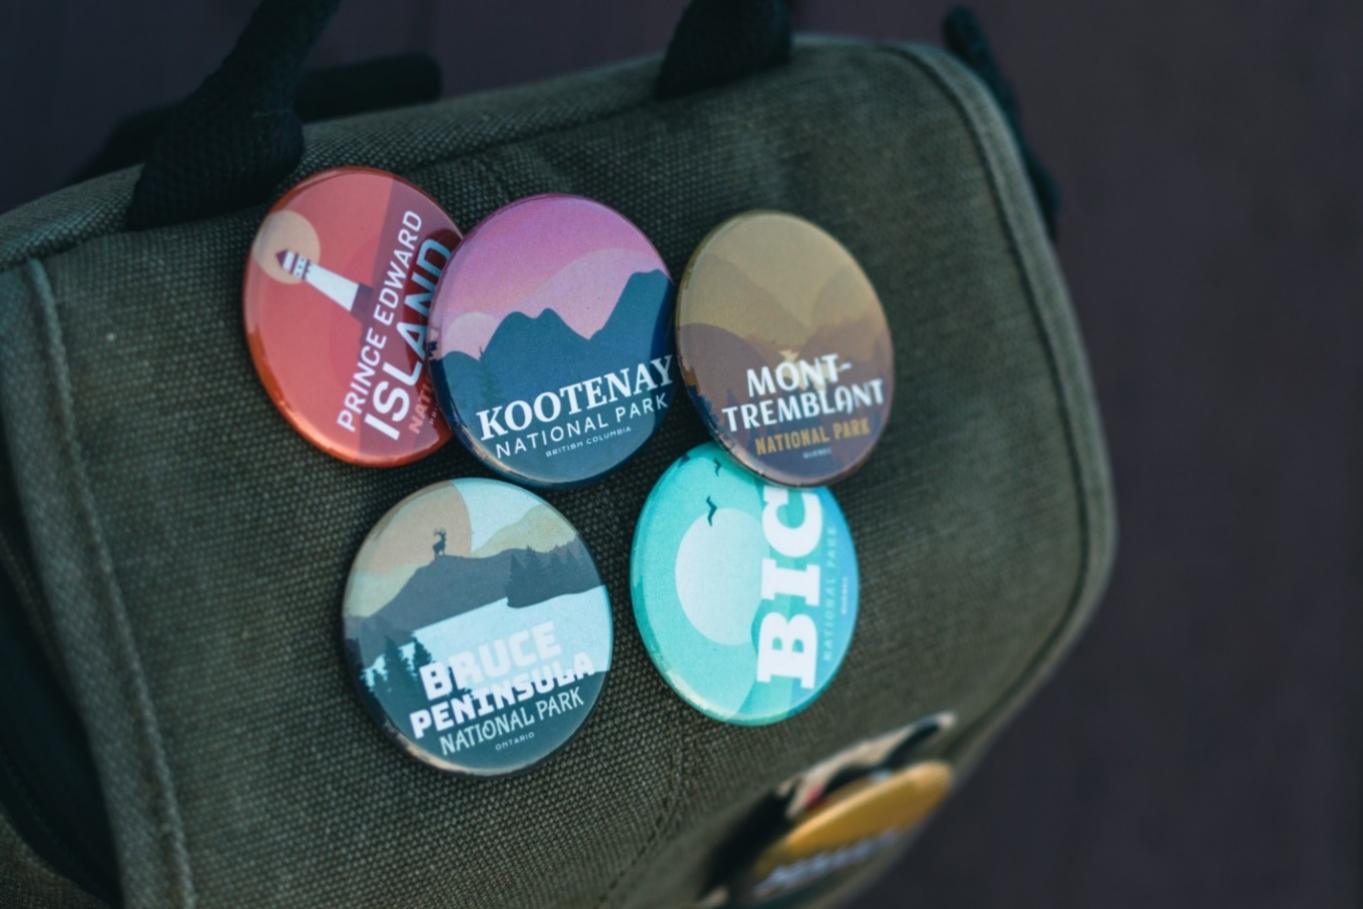 Five business badges fixed on a bag